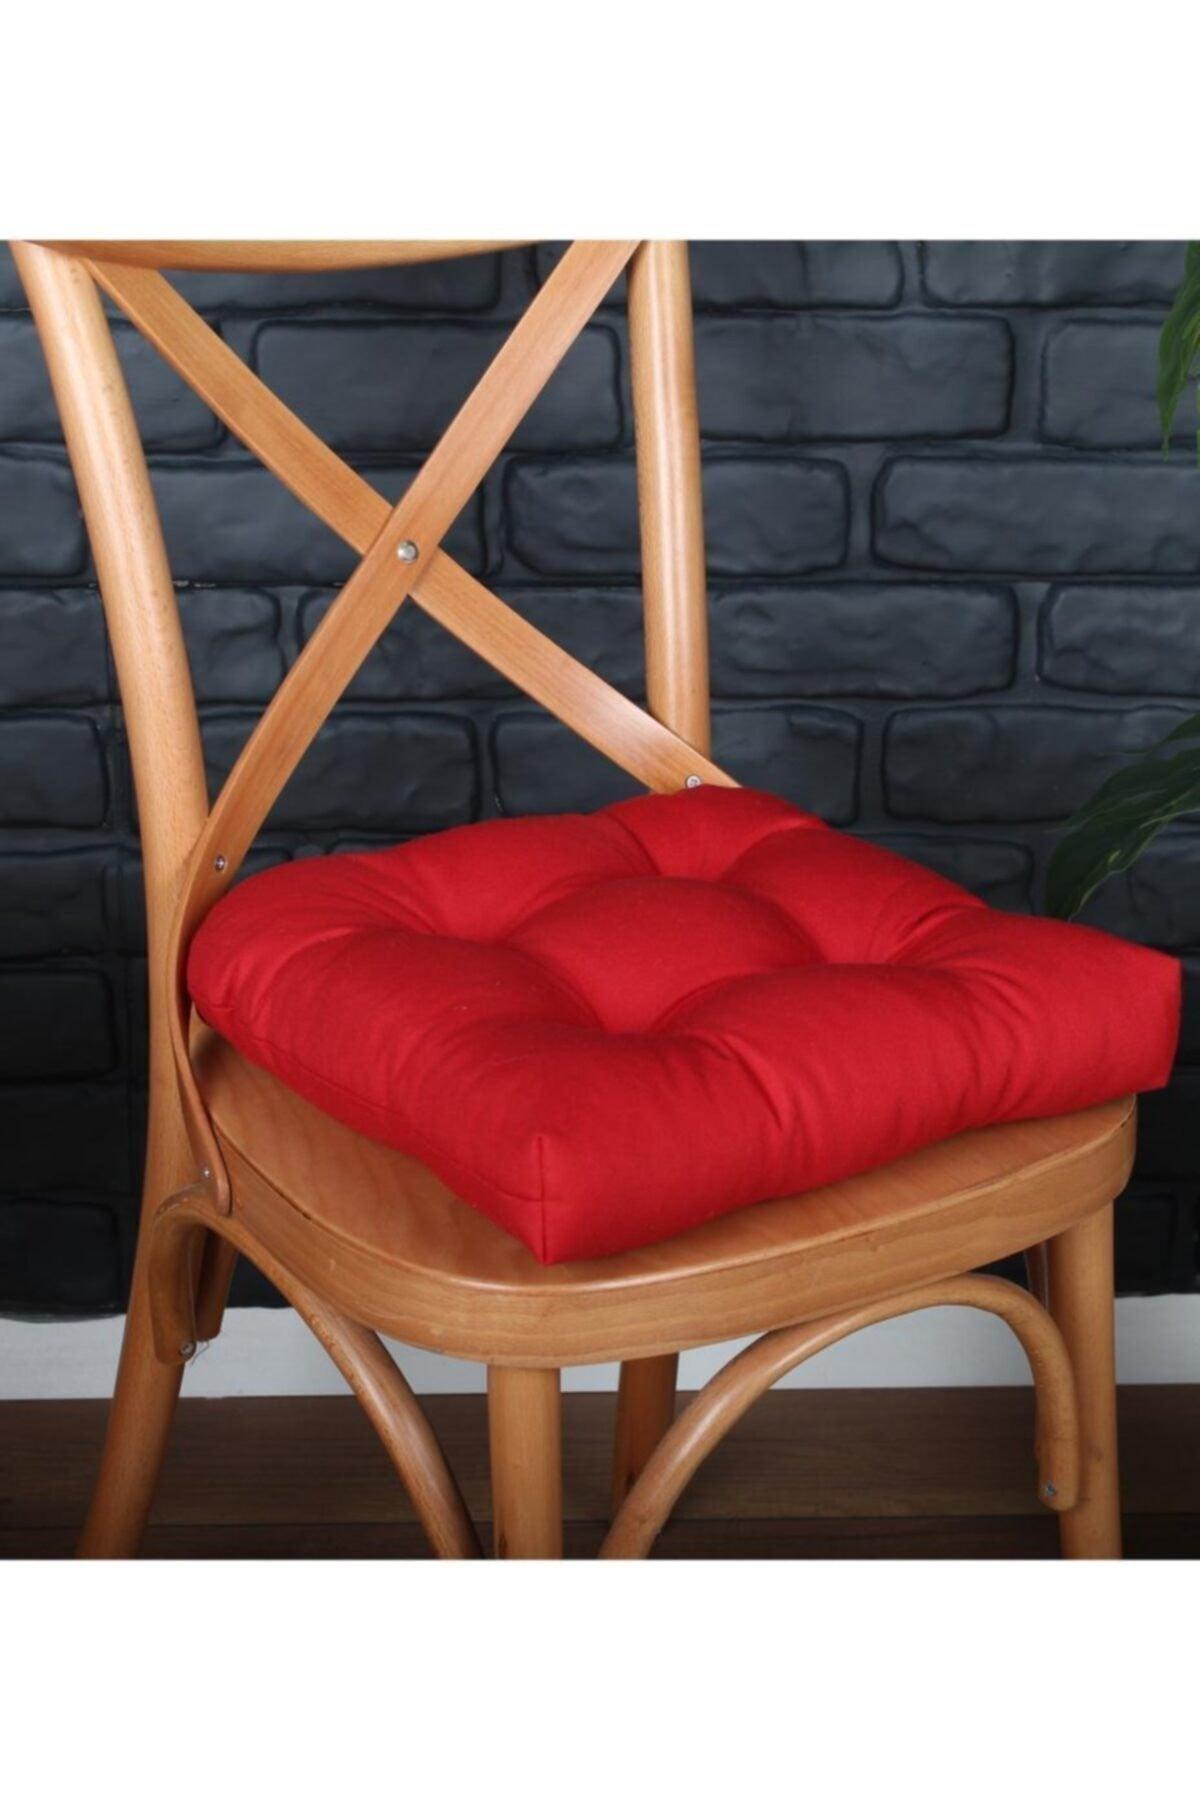 4 Pcs Lux Pofidik Red Chair Cushion Special Stitched Laced 40x40cm - Swordslife